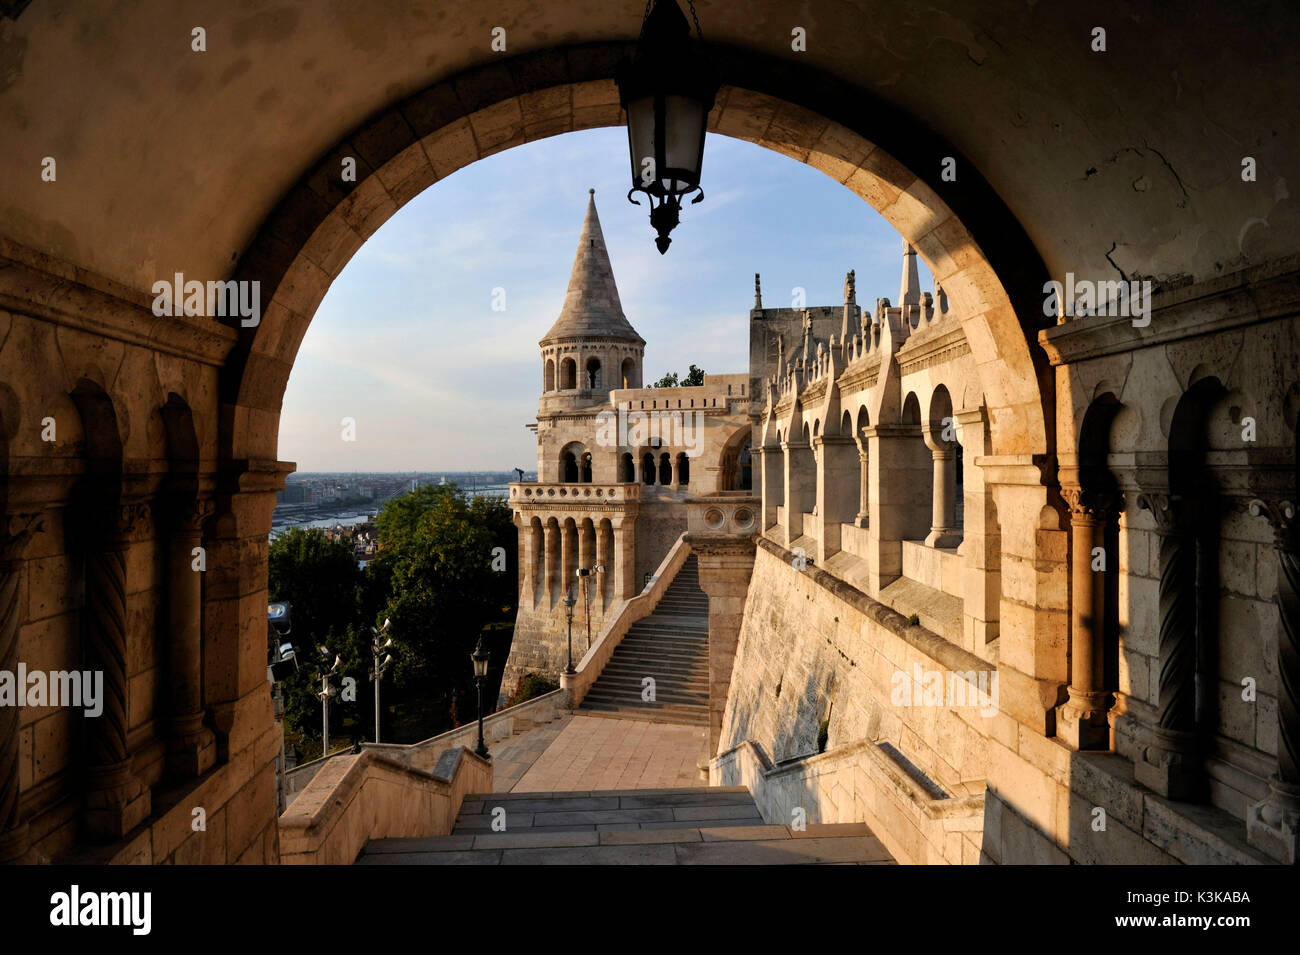 Hungary, Budapest, Fisherman's Bastion - end of 19th century located in the historical Buda Castle district listed as World Heritage by UNESCO Stock Photo